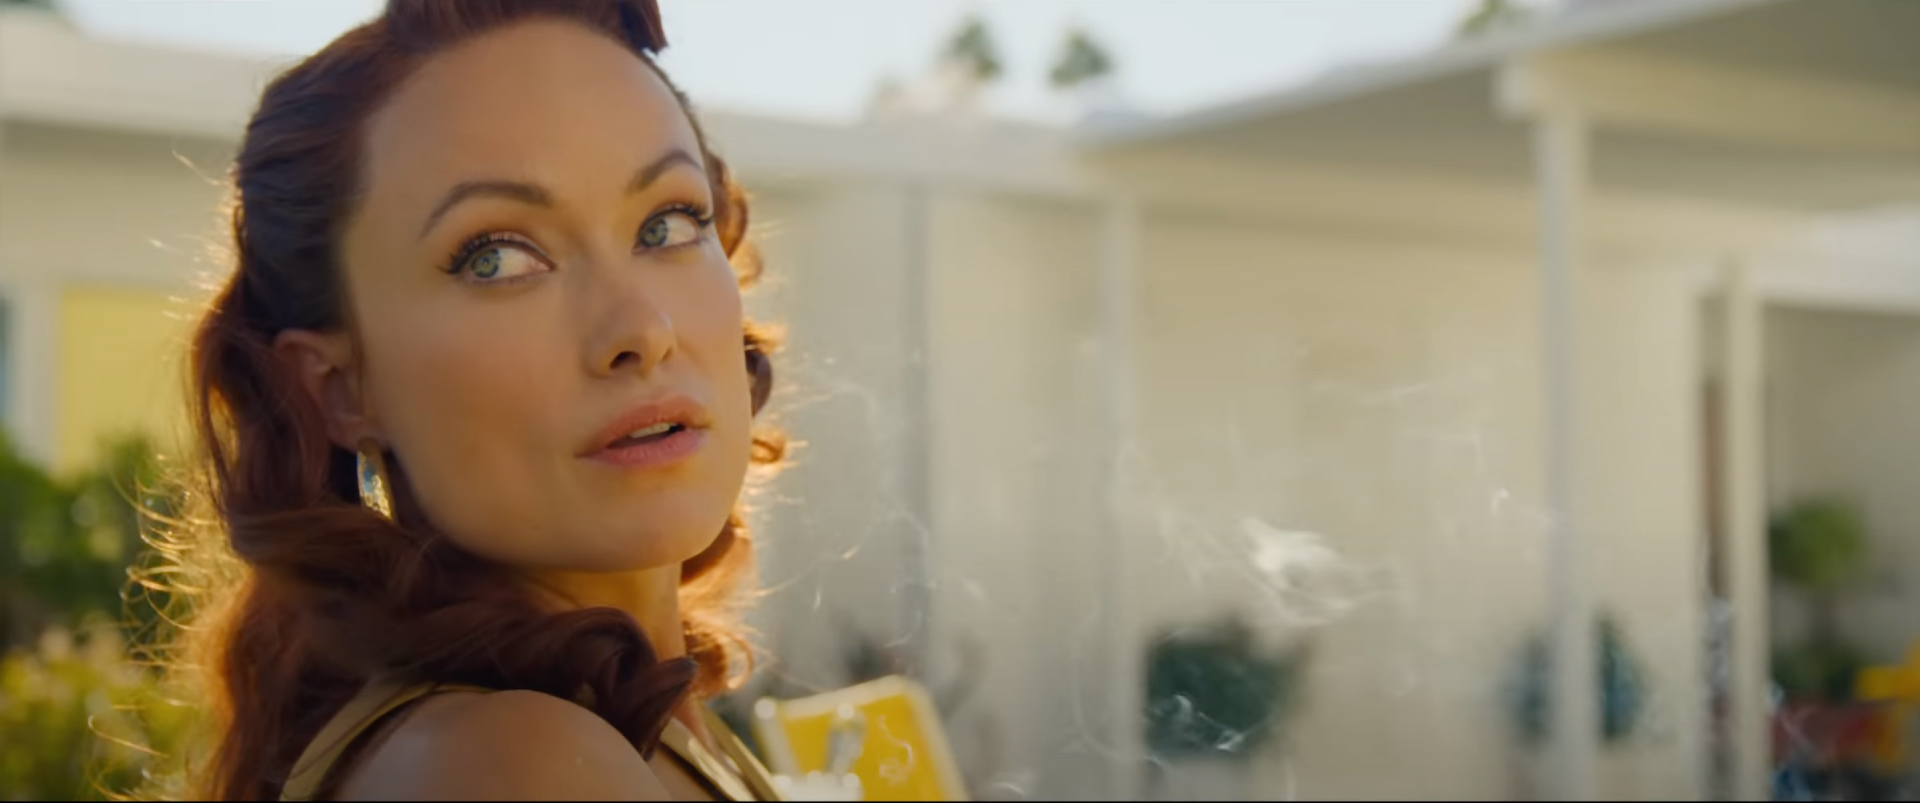 Olivia Wilde In Don't Worry Darling Trailer